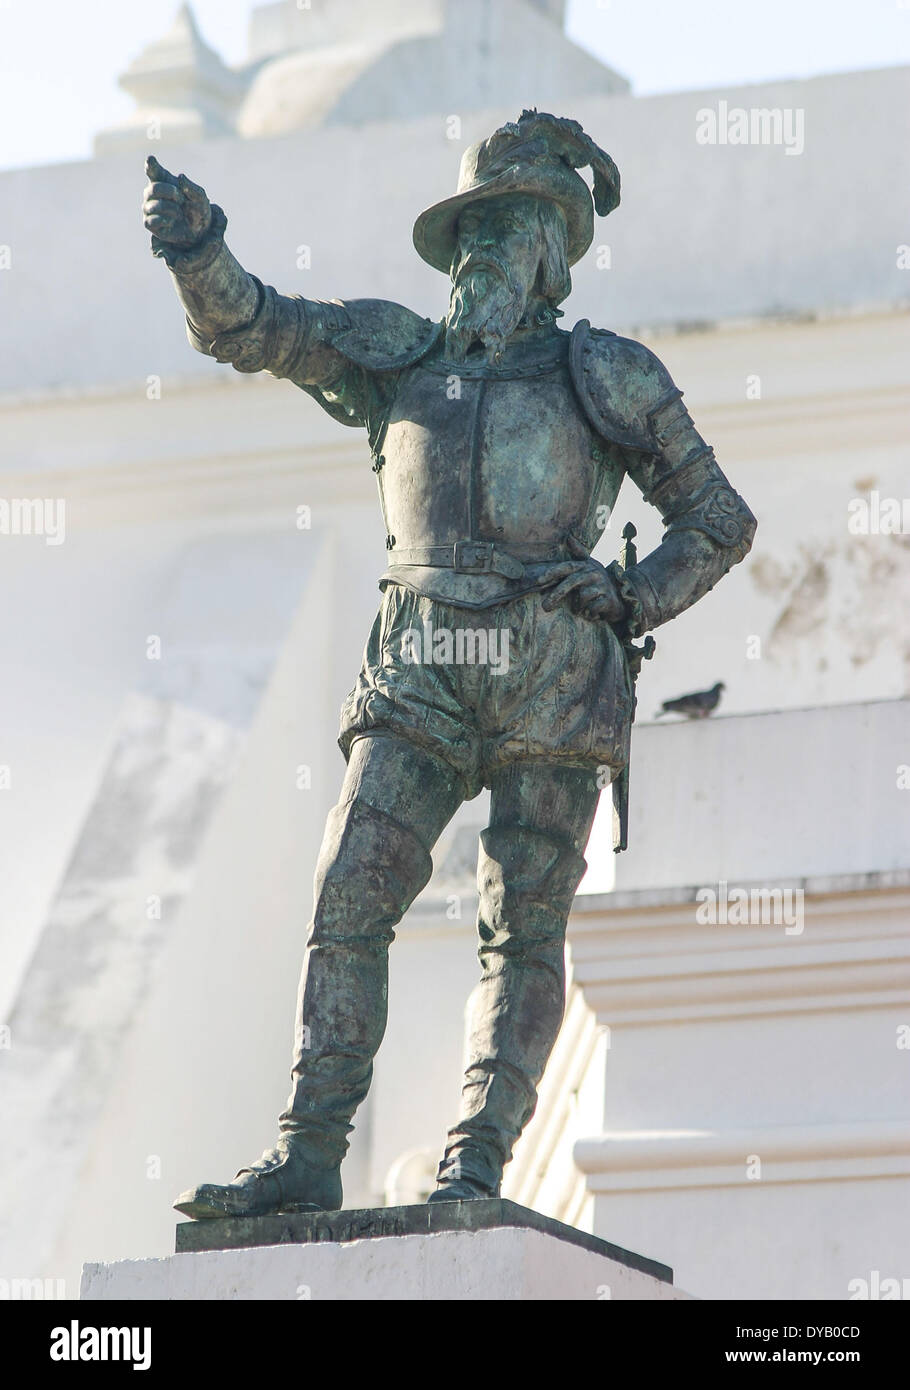 San Juan, Puerto Rico, US. 28th Mar, 2005. A bronze statue of Juan Ponce de Leon, in the center of San Jose Plaza in El Viejo San Juan (Old San Juan), honors the first Governor of Puerto Rico. The San Jose Church is on the northern side of the plaza. The statue was forged in 1882 in New York from the cannons from a failed British attack on the city of San Juan in 1797. © Arnold Drapkin/ZUMAPRESS.com/Alamy Live News Stock Photo